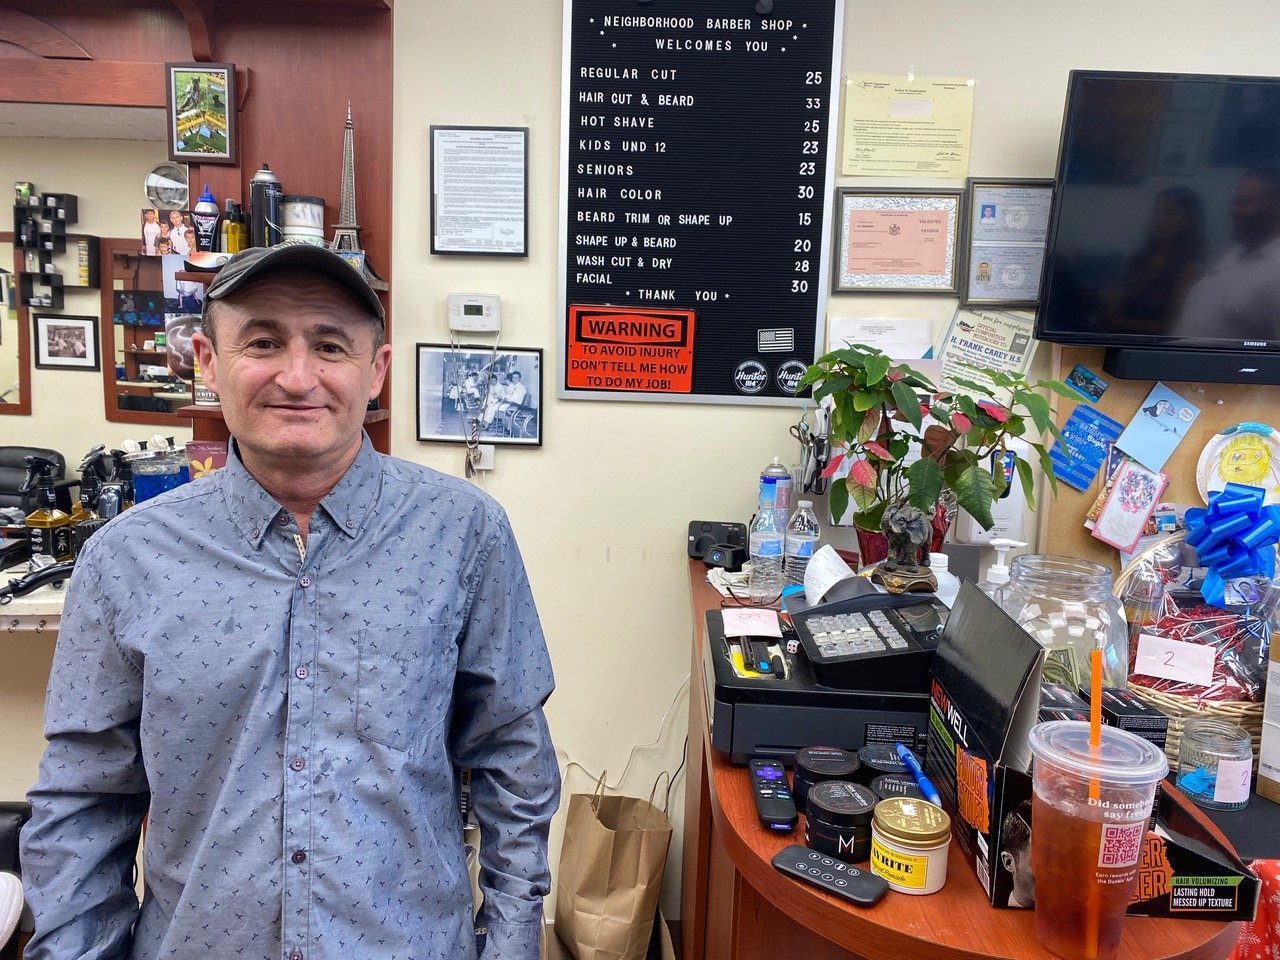 For years, Ruben Zargarov, owner of the Neighborhood Barber Shop in Franklin Square, has provided free haircuts to local children with disabilities.